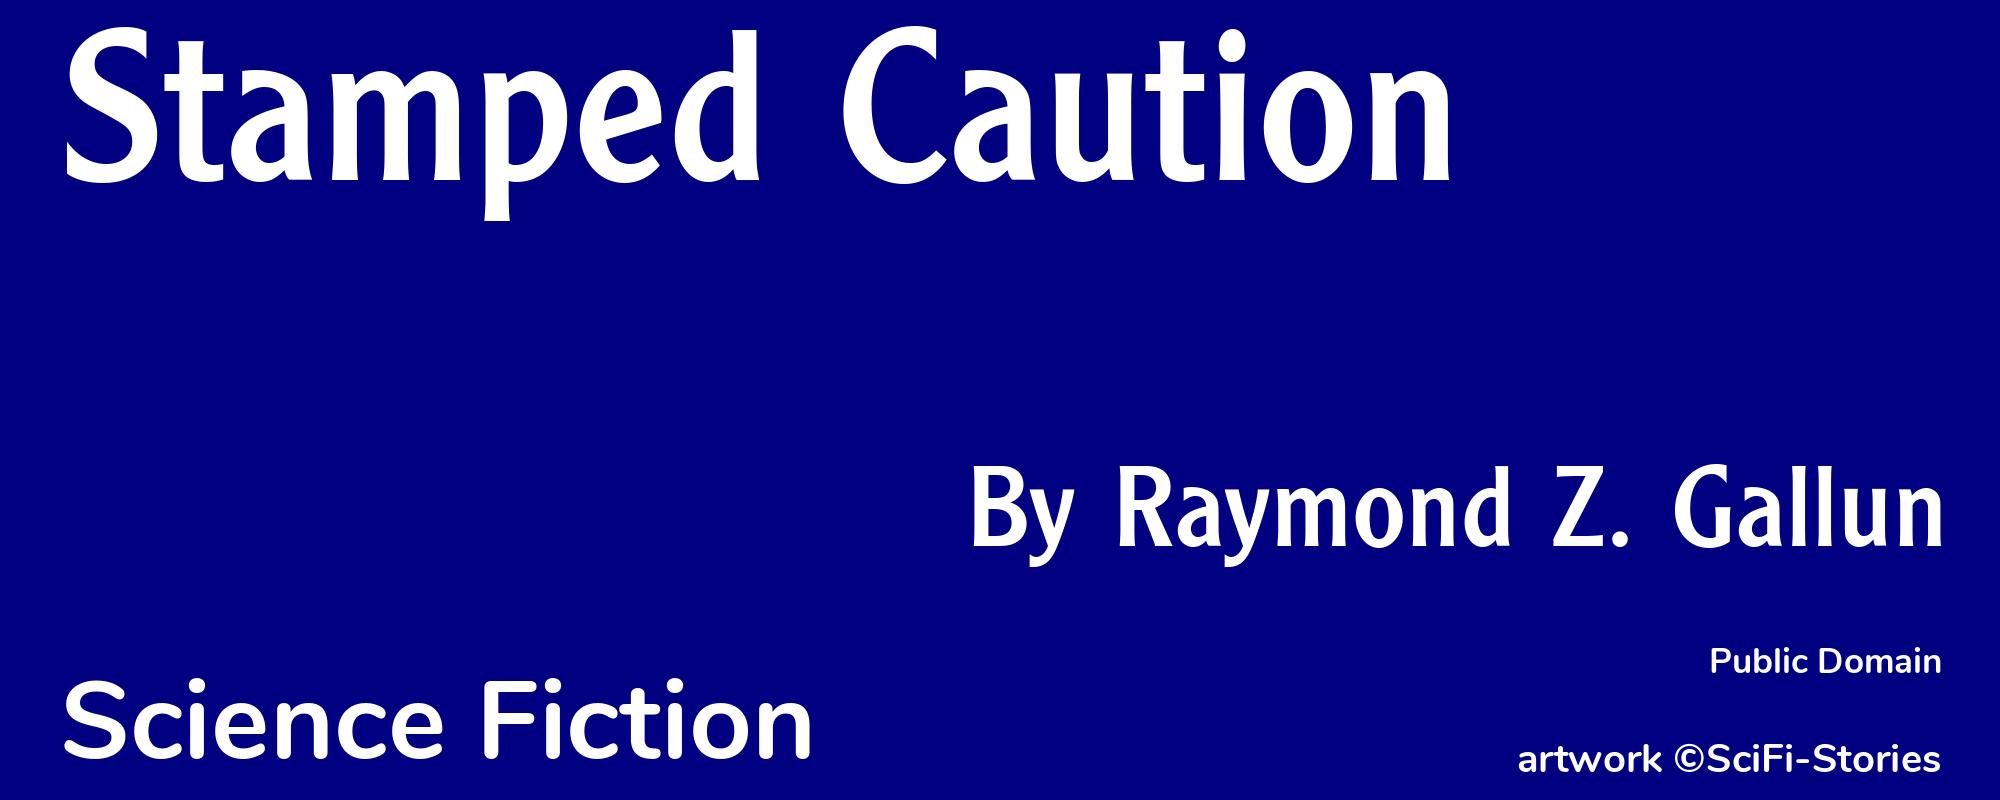 Stamped Caution - Cover